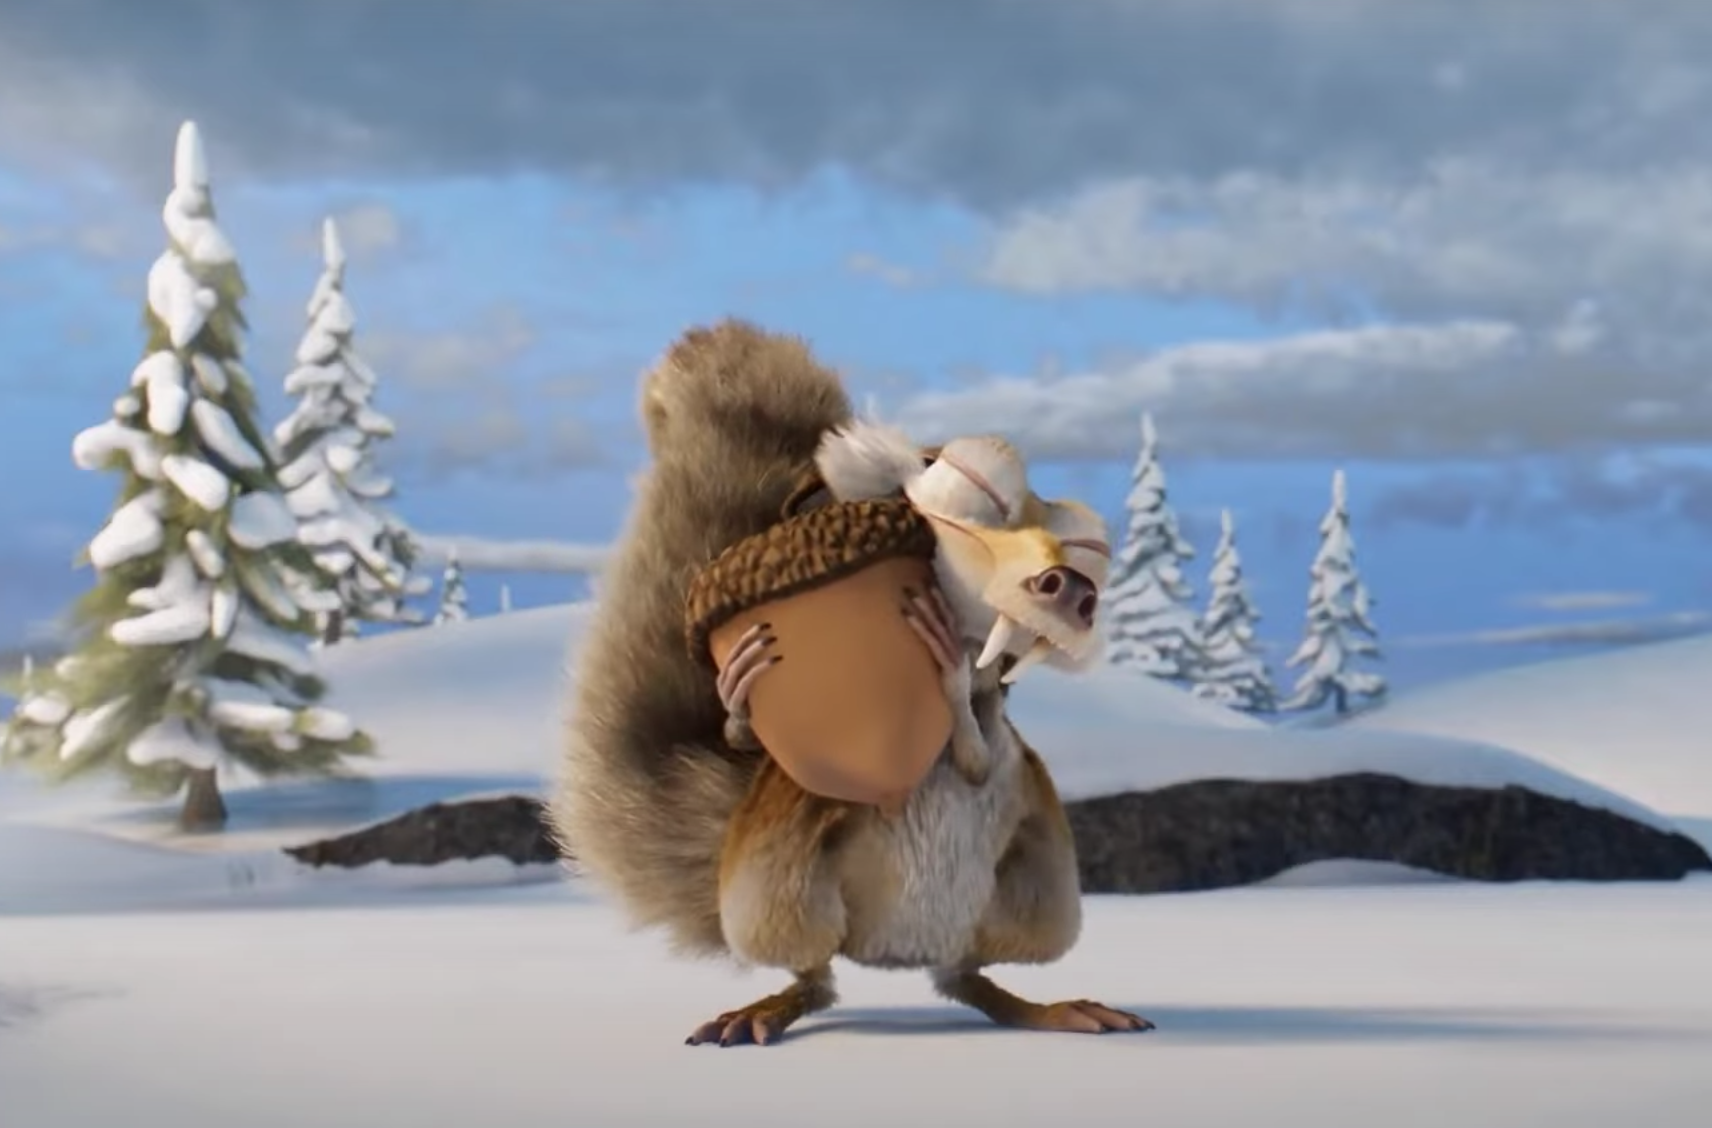 After 20 Years, Scrat From ‘Ice Age’ Finally Gets The Acorn